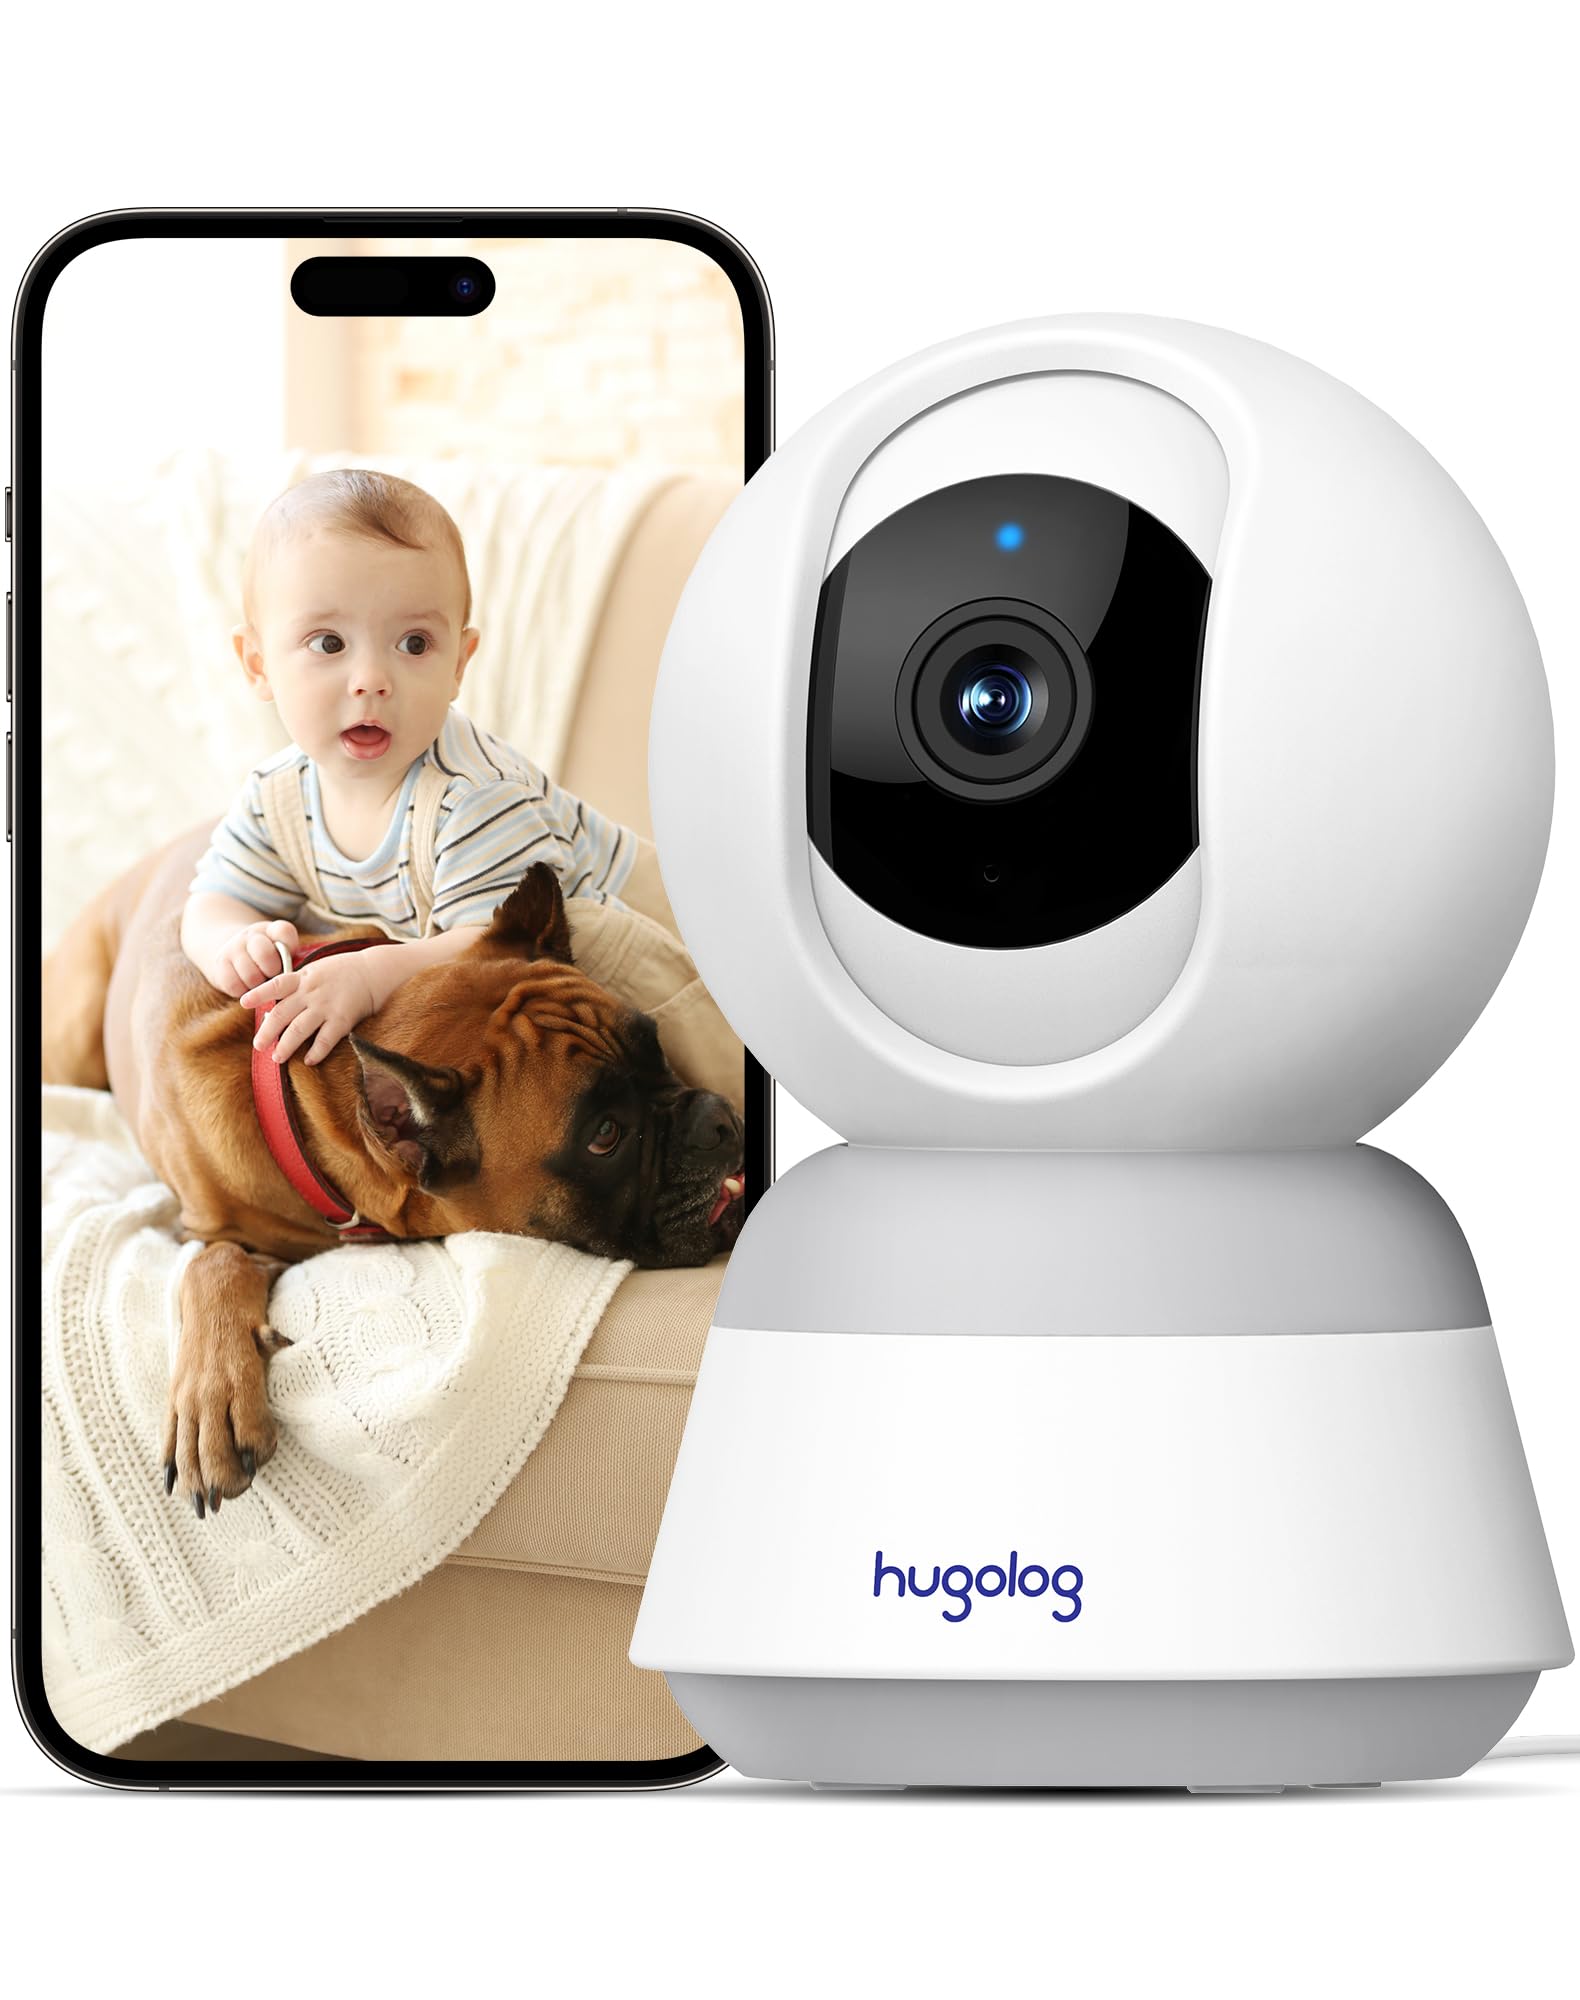 $14.99 Hugolog 2K 3MP Indoor Pan/Tilt Security Camera with 12×Zoom,Ideal for Baby Monitor/Pet Camera/Home Security,Starlight Color Night Vision,Human/Sound Detection,Two-Way Audio